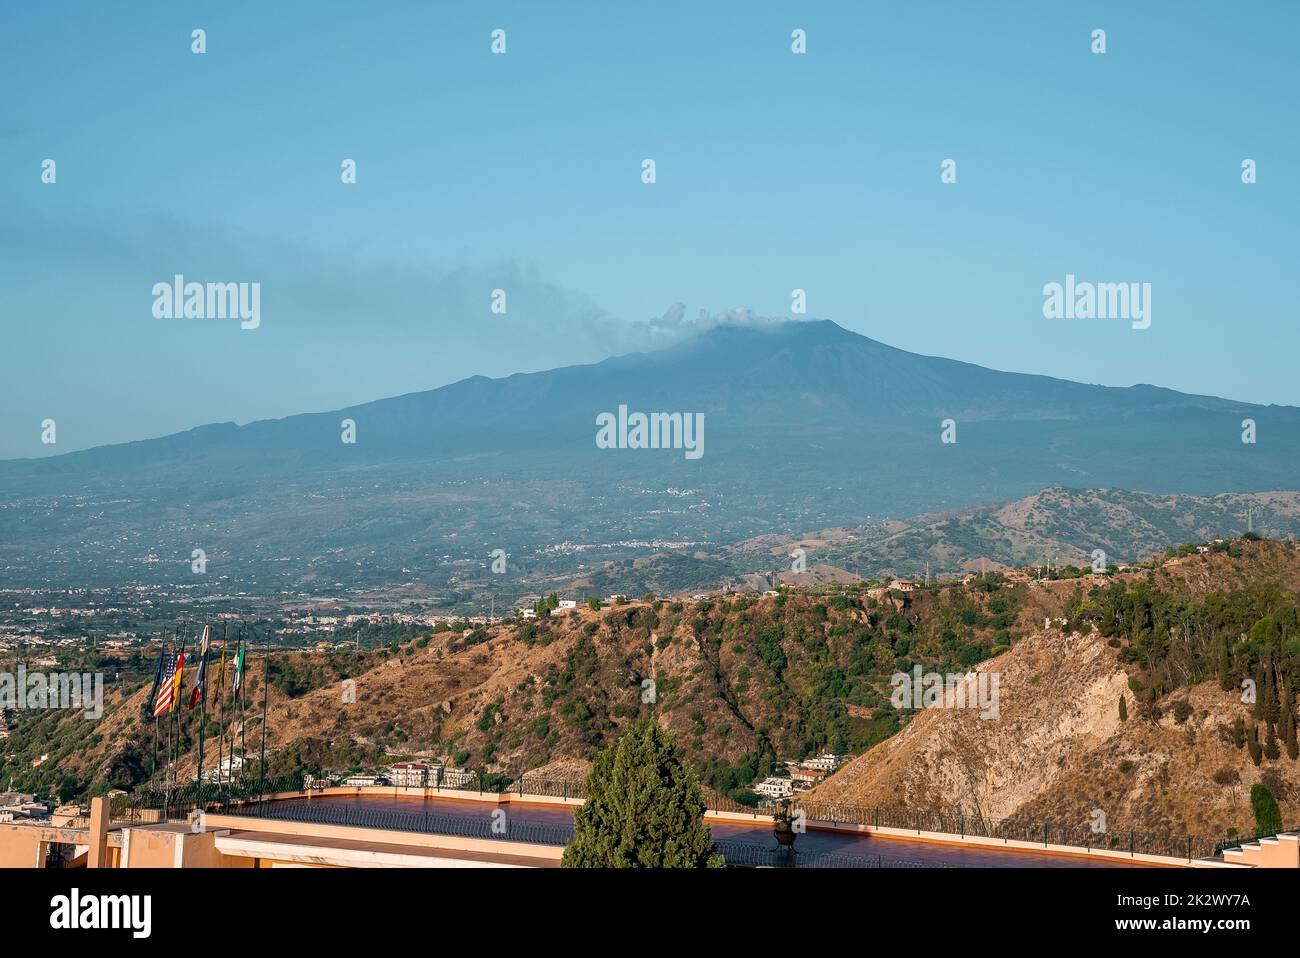 Hotel Elios overlooking scenic view of Etna Volcano with blue sky in background Stock Photo